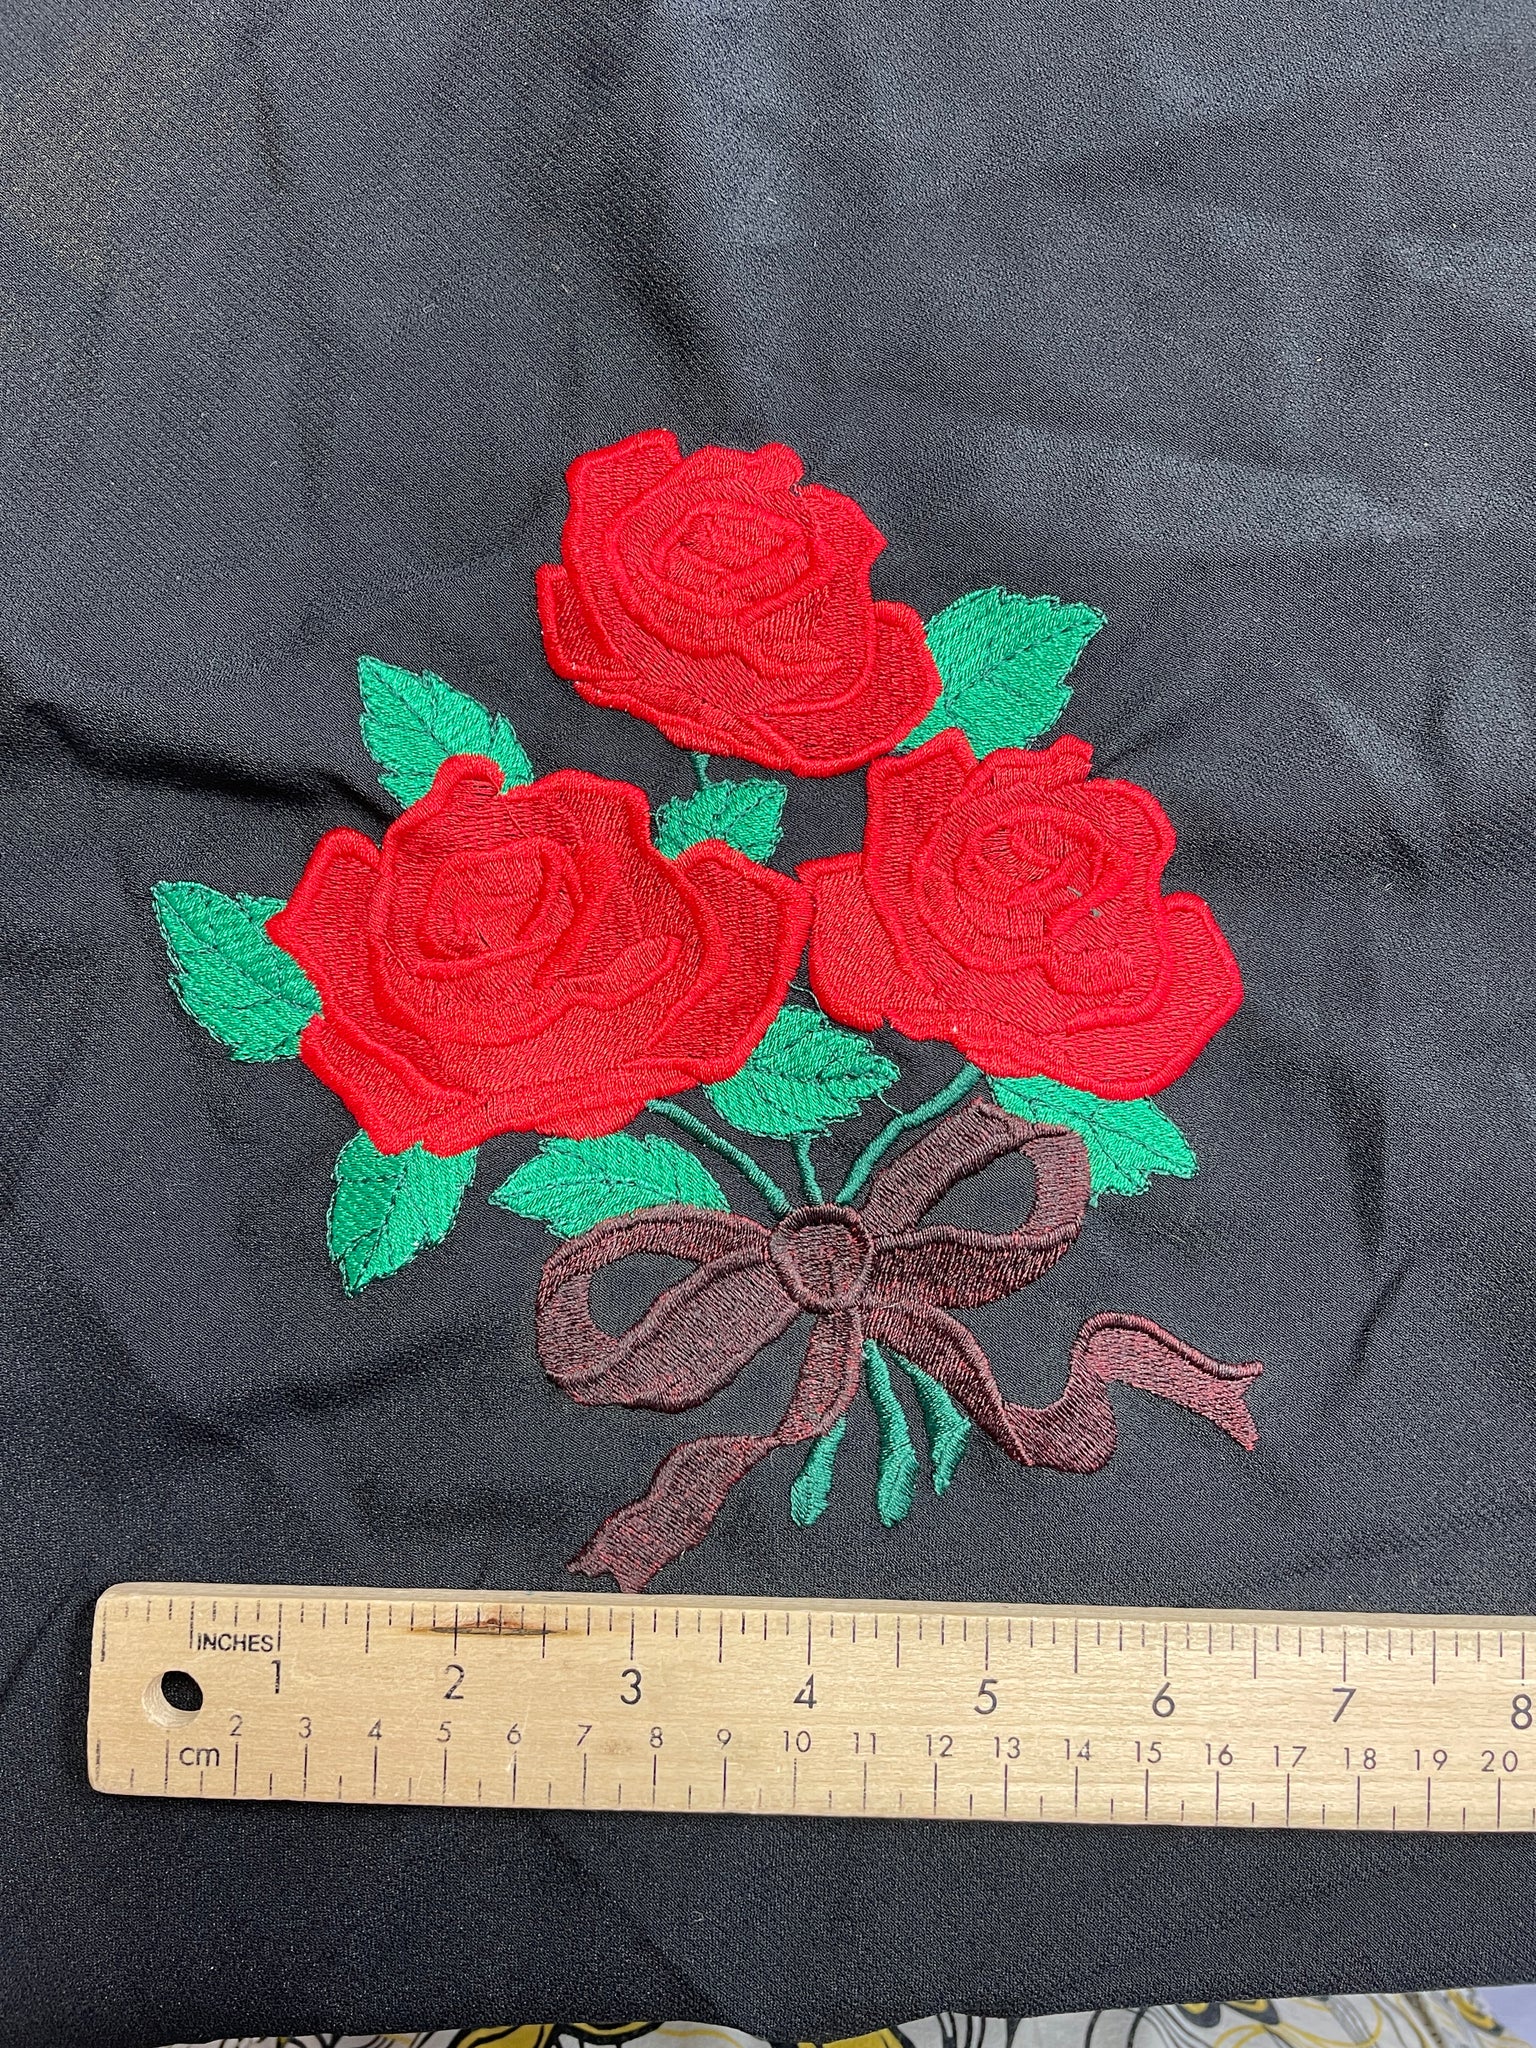 Machine Embroidered Motif - Red Rose and Green Leaves on Black